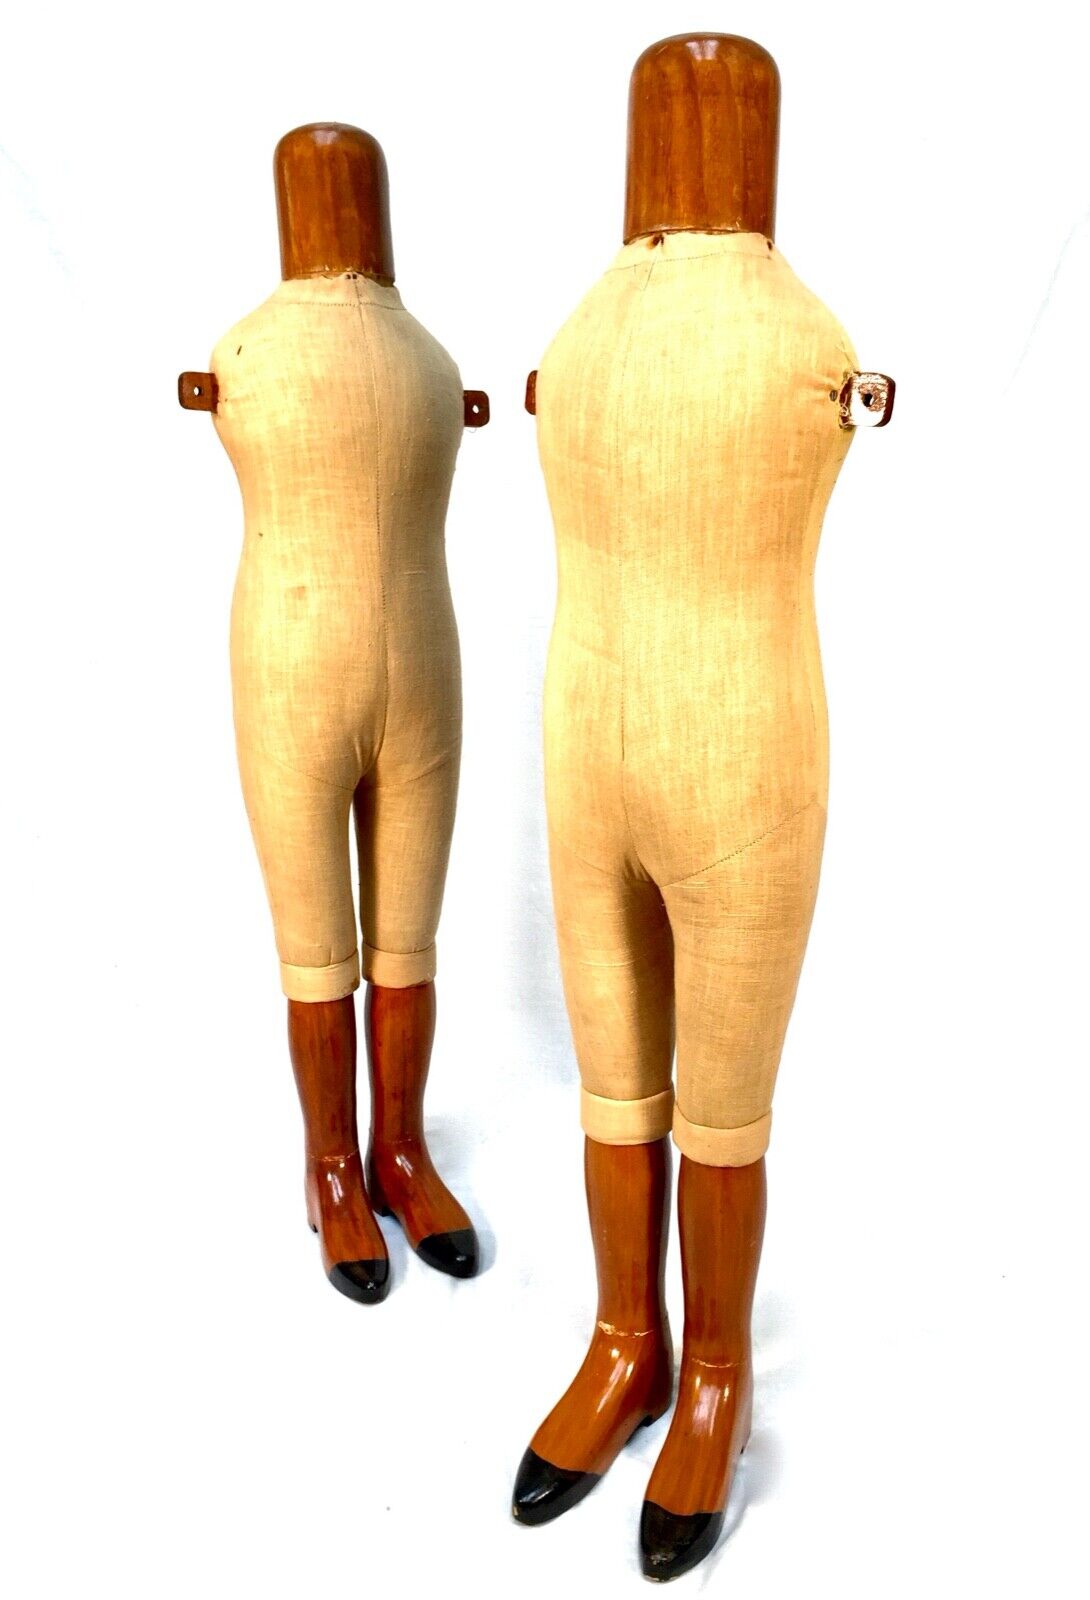 Pair of Antique Advertising Shop Display Wooden Mannequins / Clothes Stands